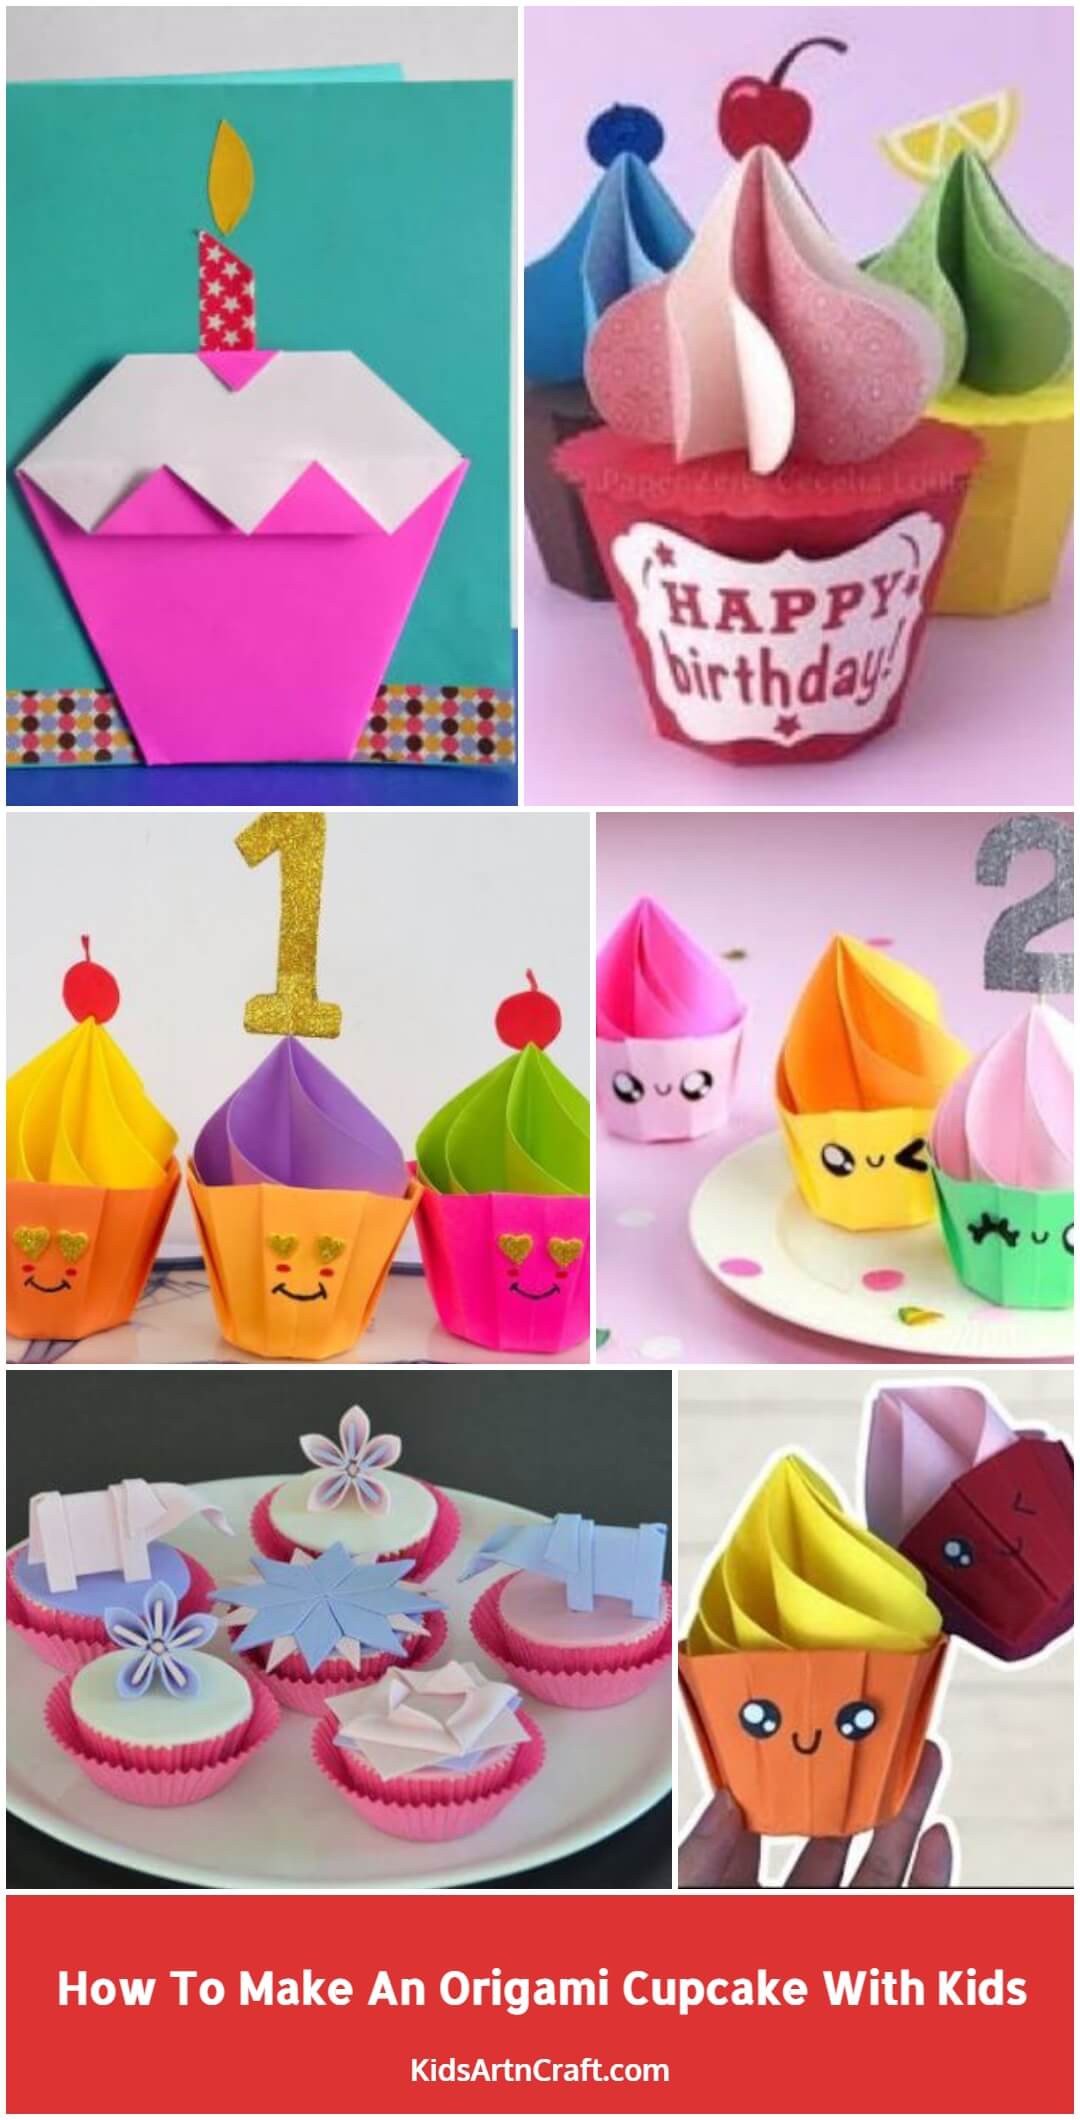 How To Make An Origami Cupcake With Kids